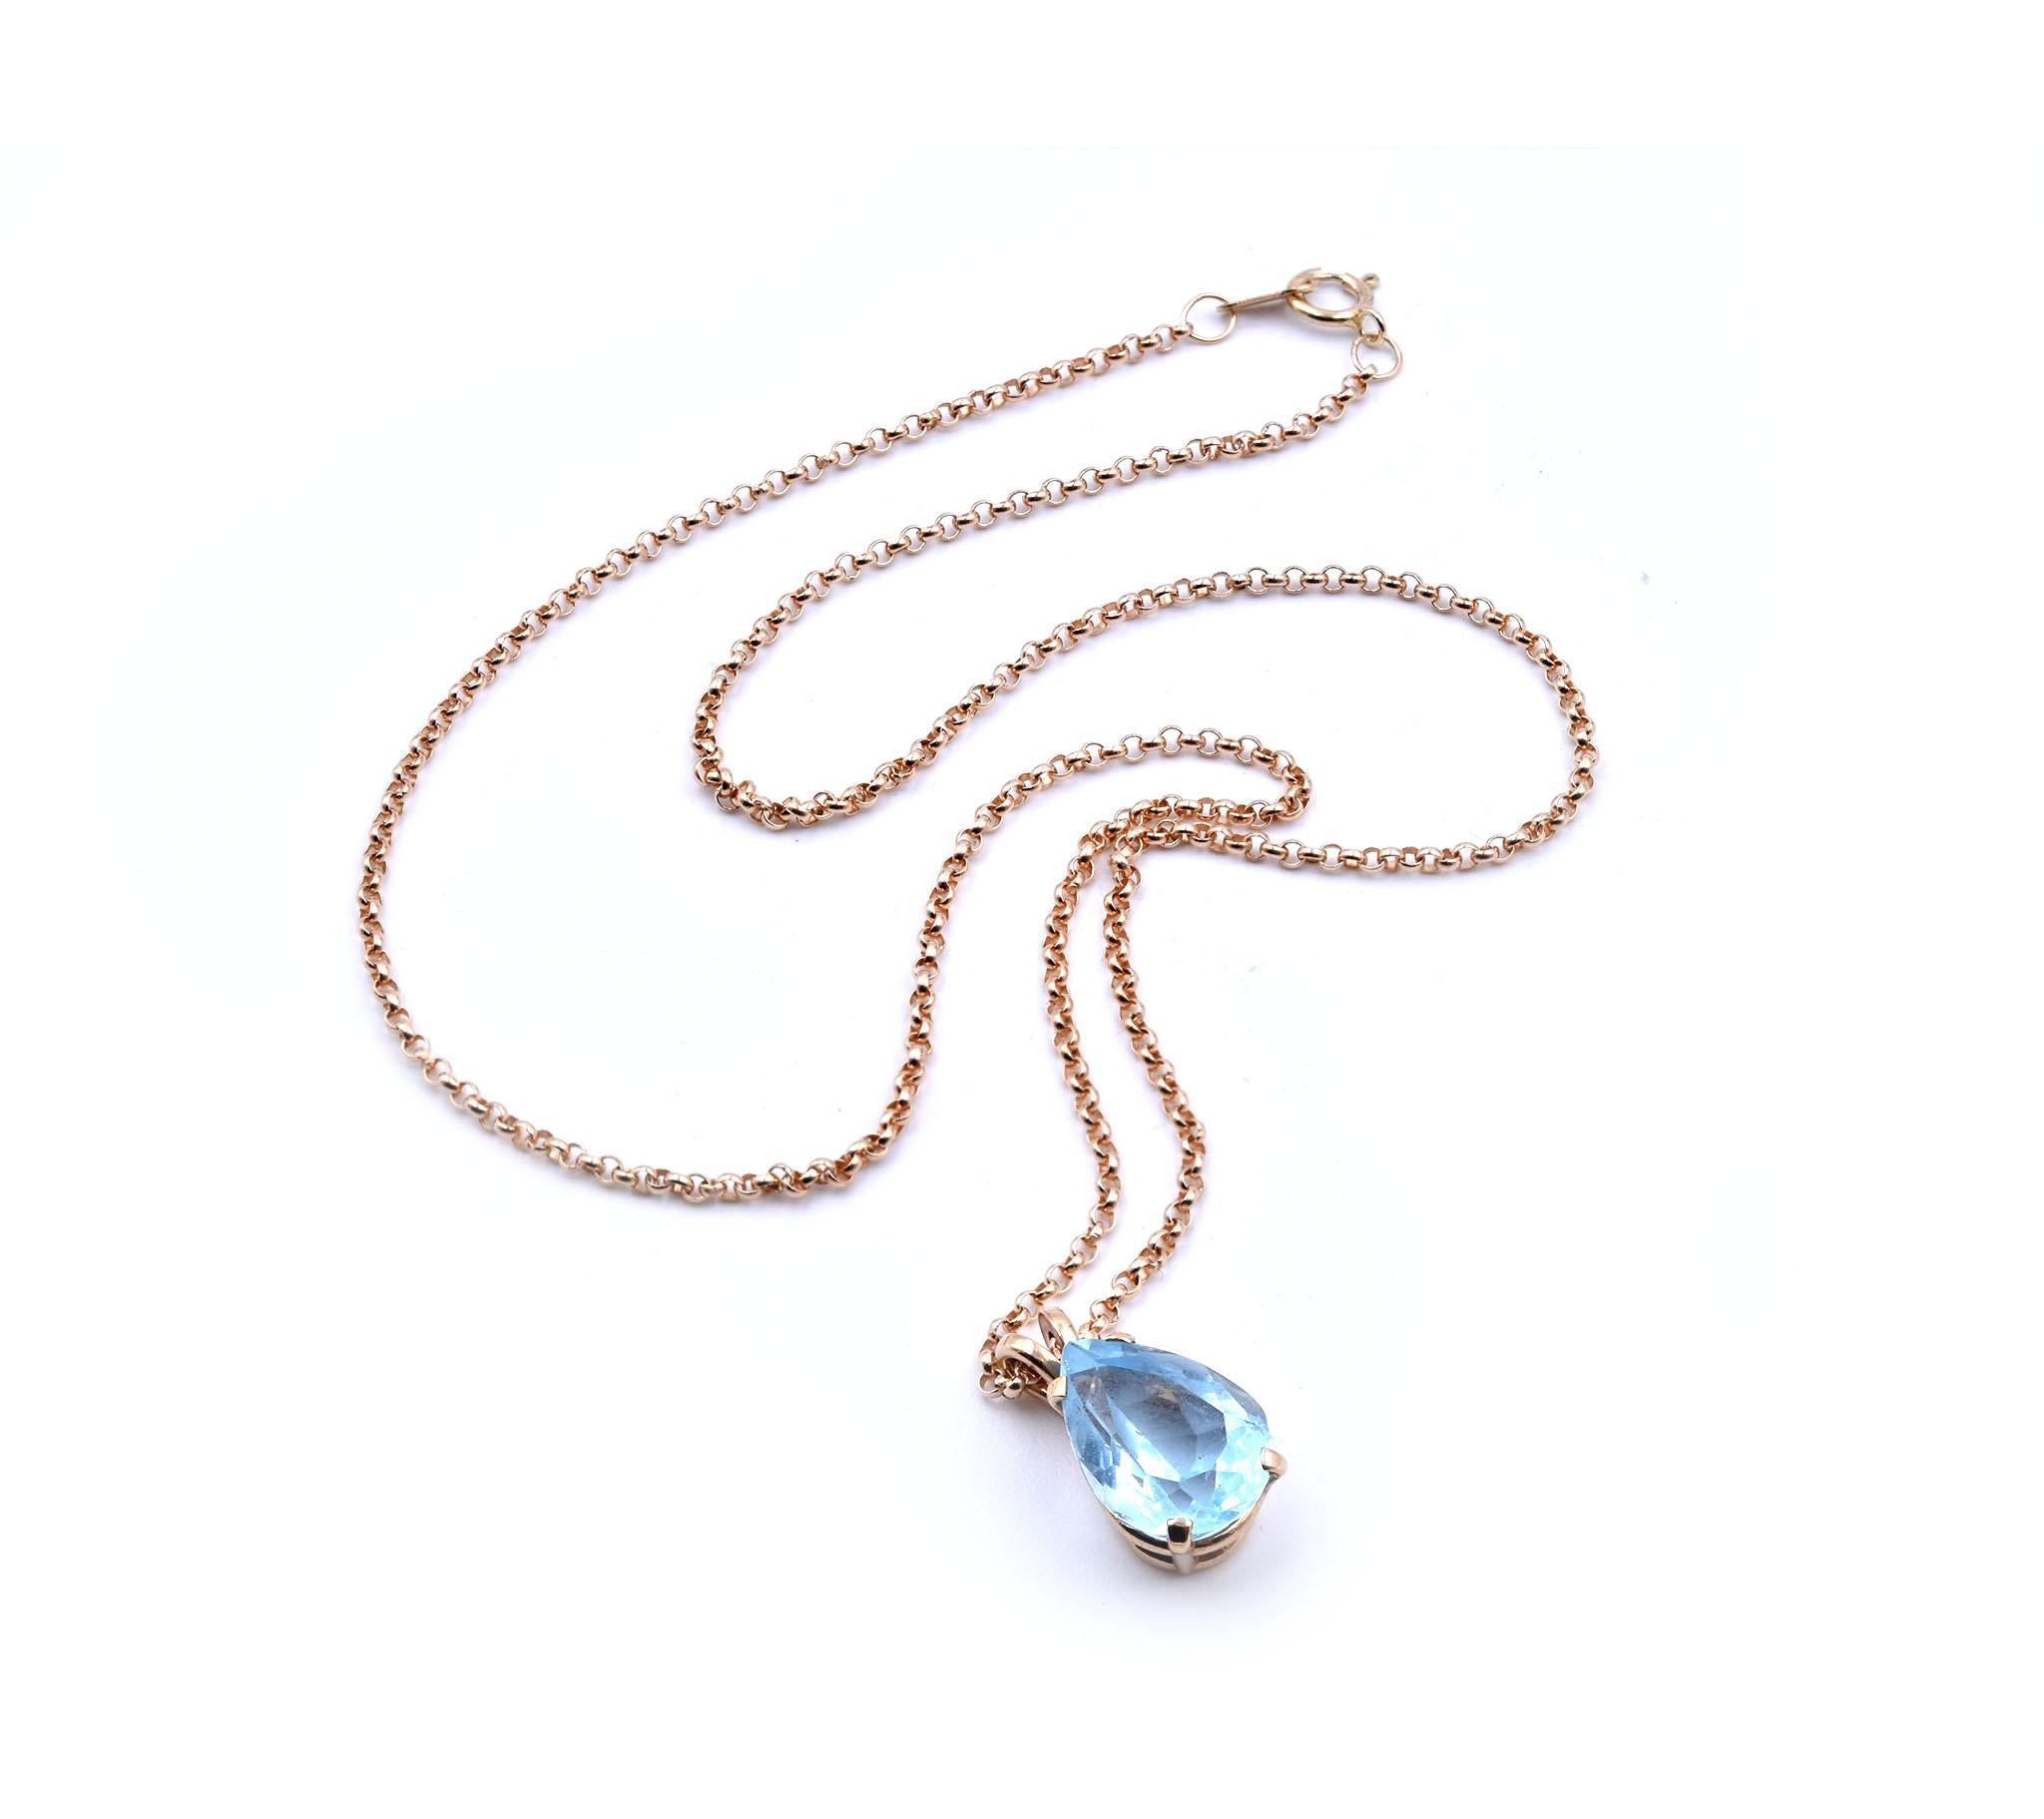 Designer: custom
Material: 14K yellow gold
Blue Topaz: 1 pear cut = 4.77ct
Dimensions: the pendant measures 16.04mm x 9.01mm 
Weight: 1.94 grams
